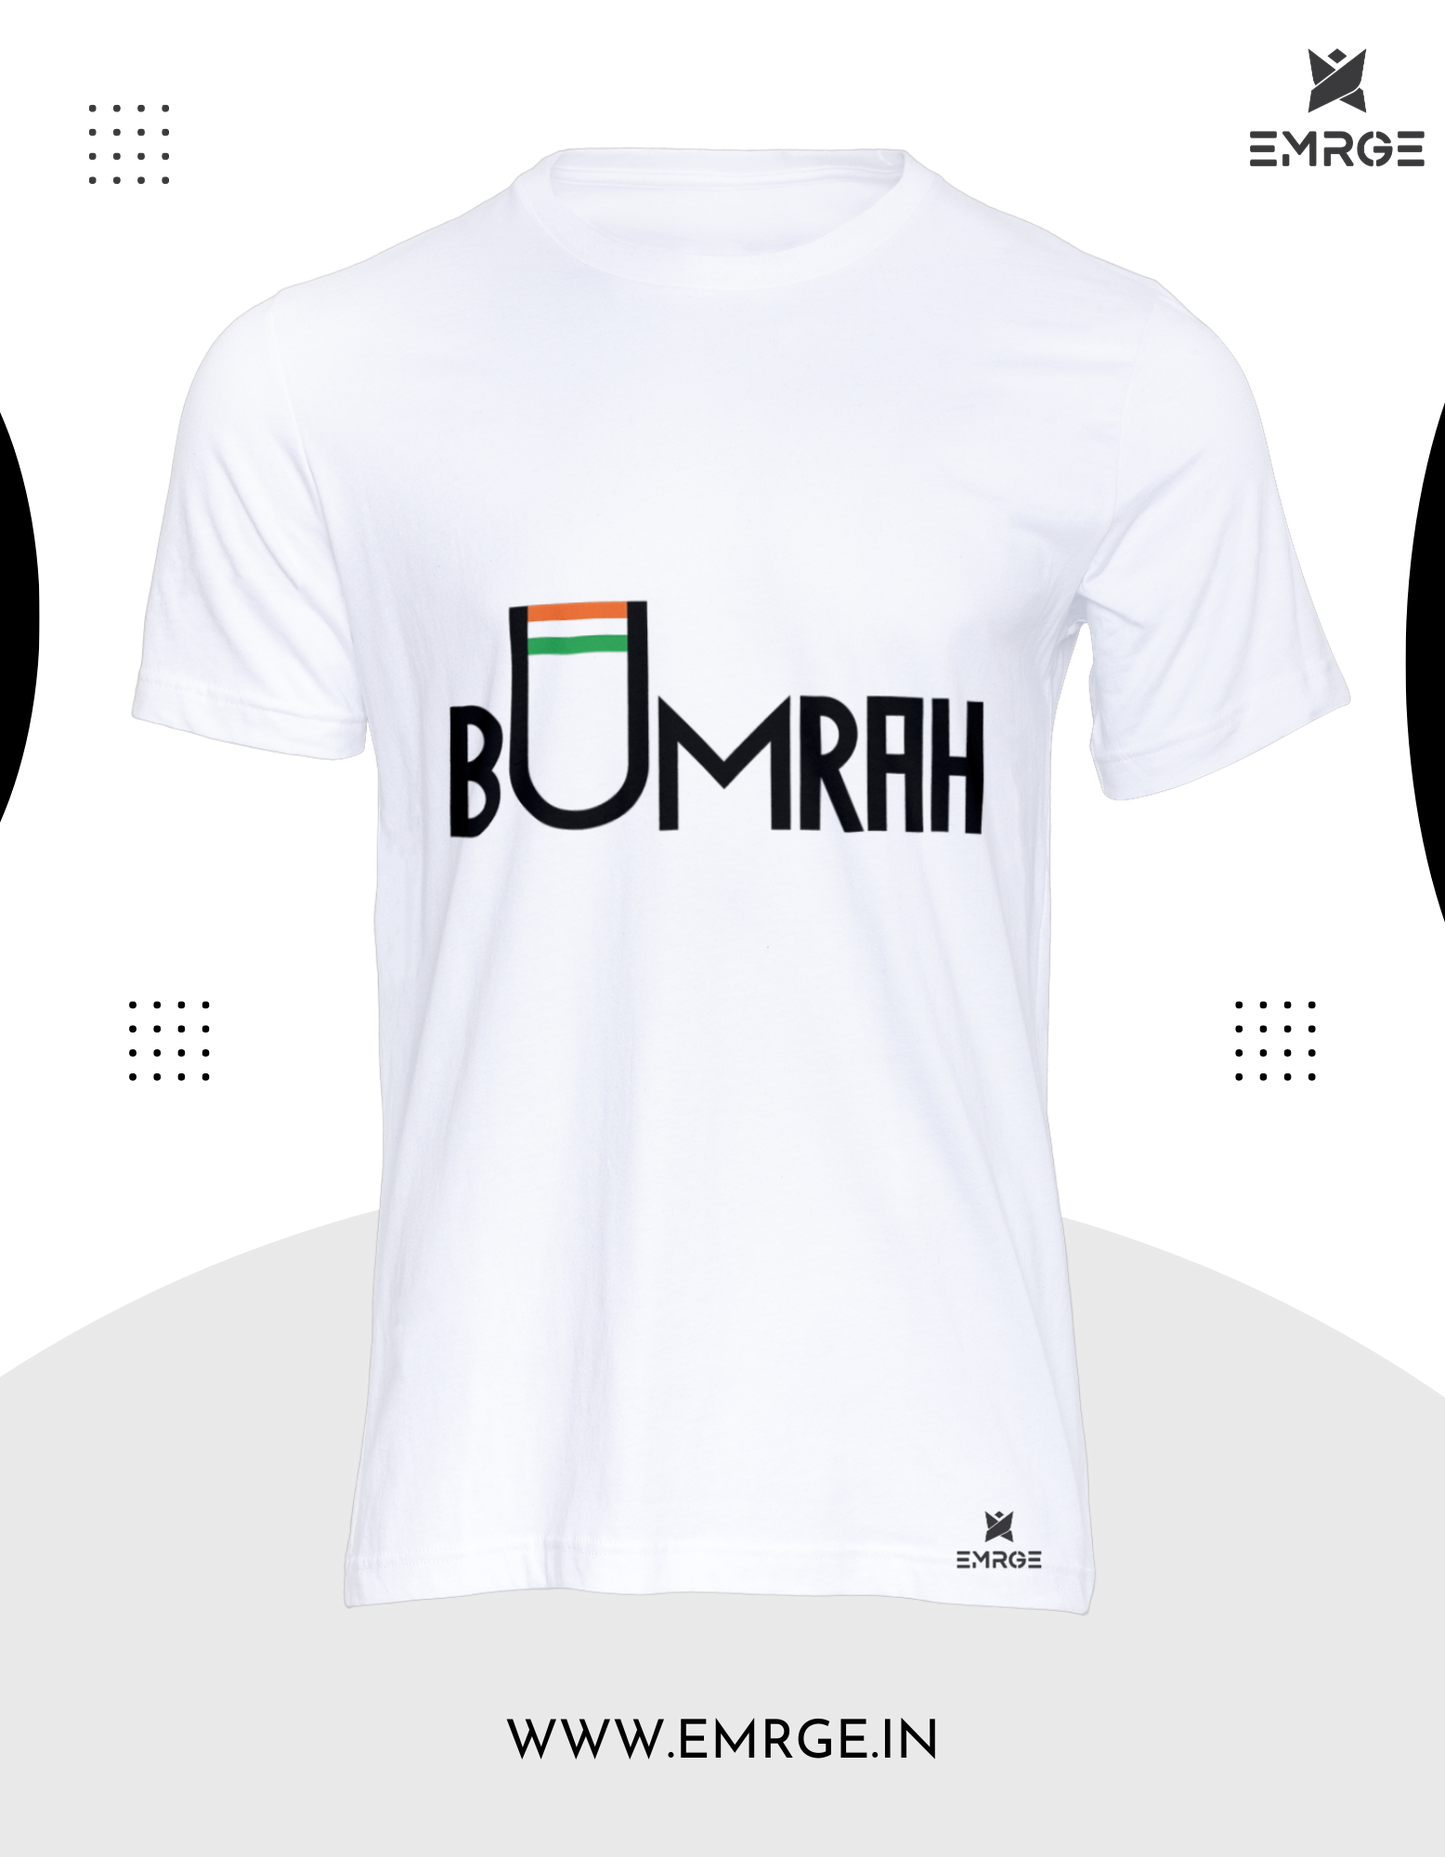 World Cup Special: Bumrah Branded T-Shirt Available on Multiple Colors